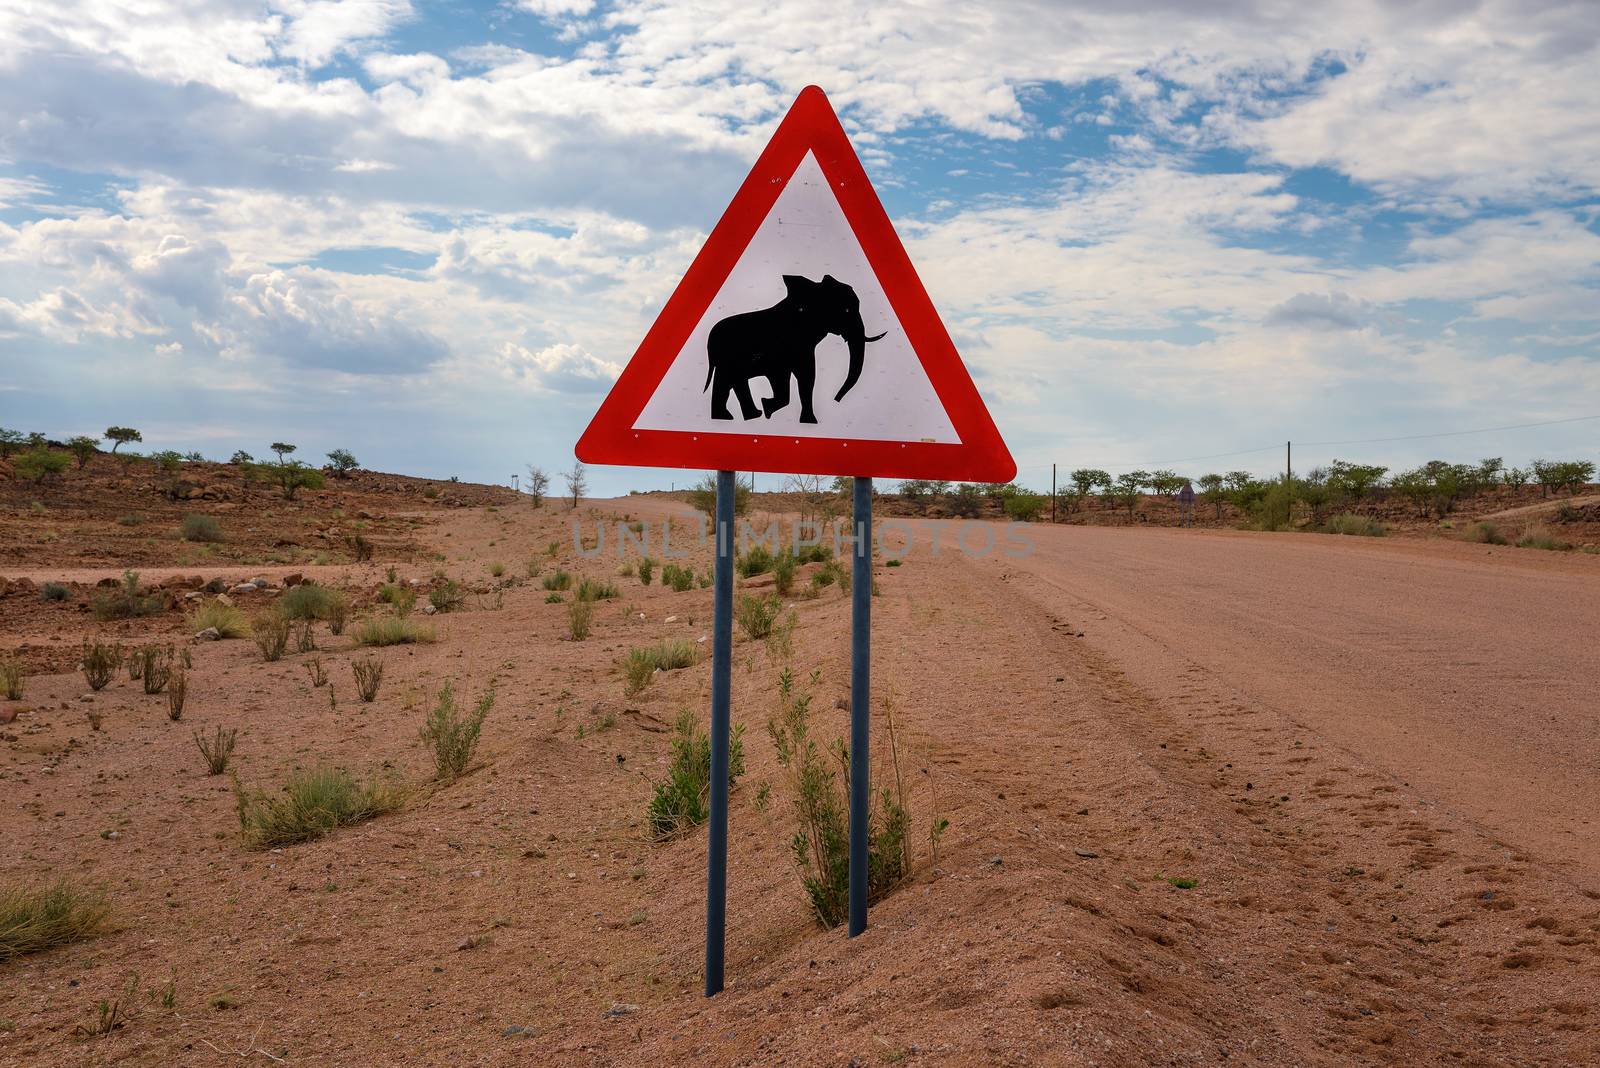 Elephant crossing warning road sign placed in the desert of Namibia by nickfox